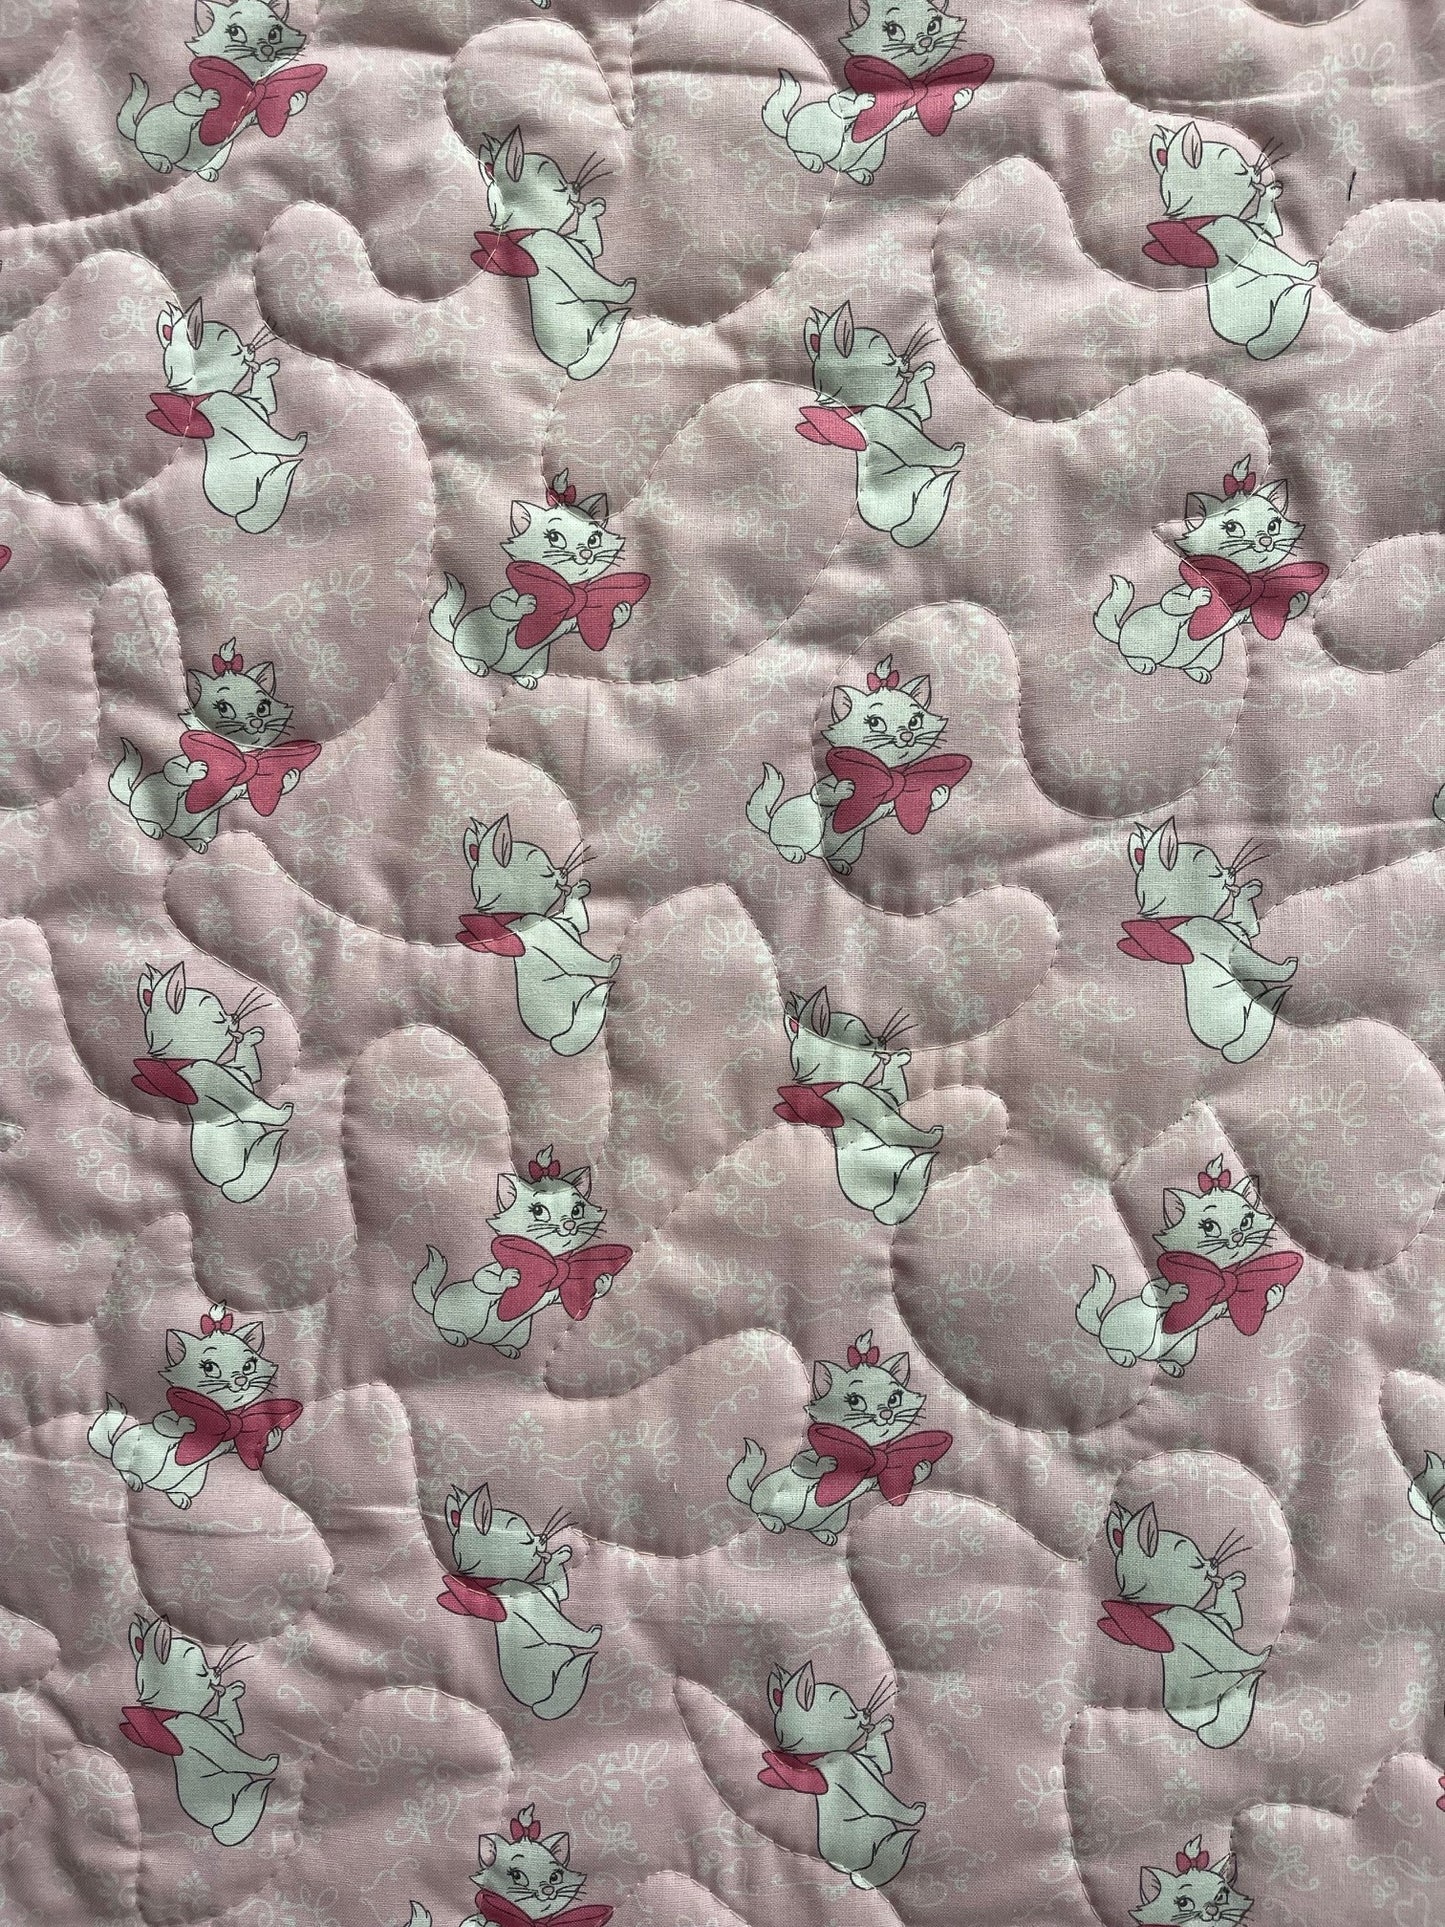 Walt Disney's THE ARISTOCATS Inspired Quilted Blanket Cats Marie